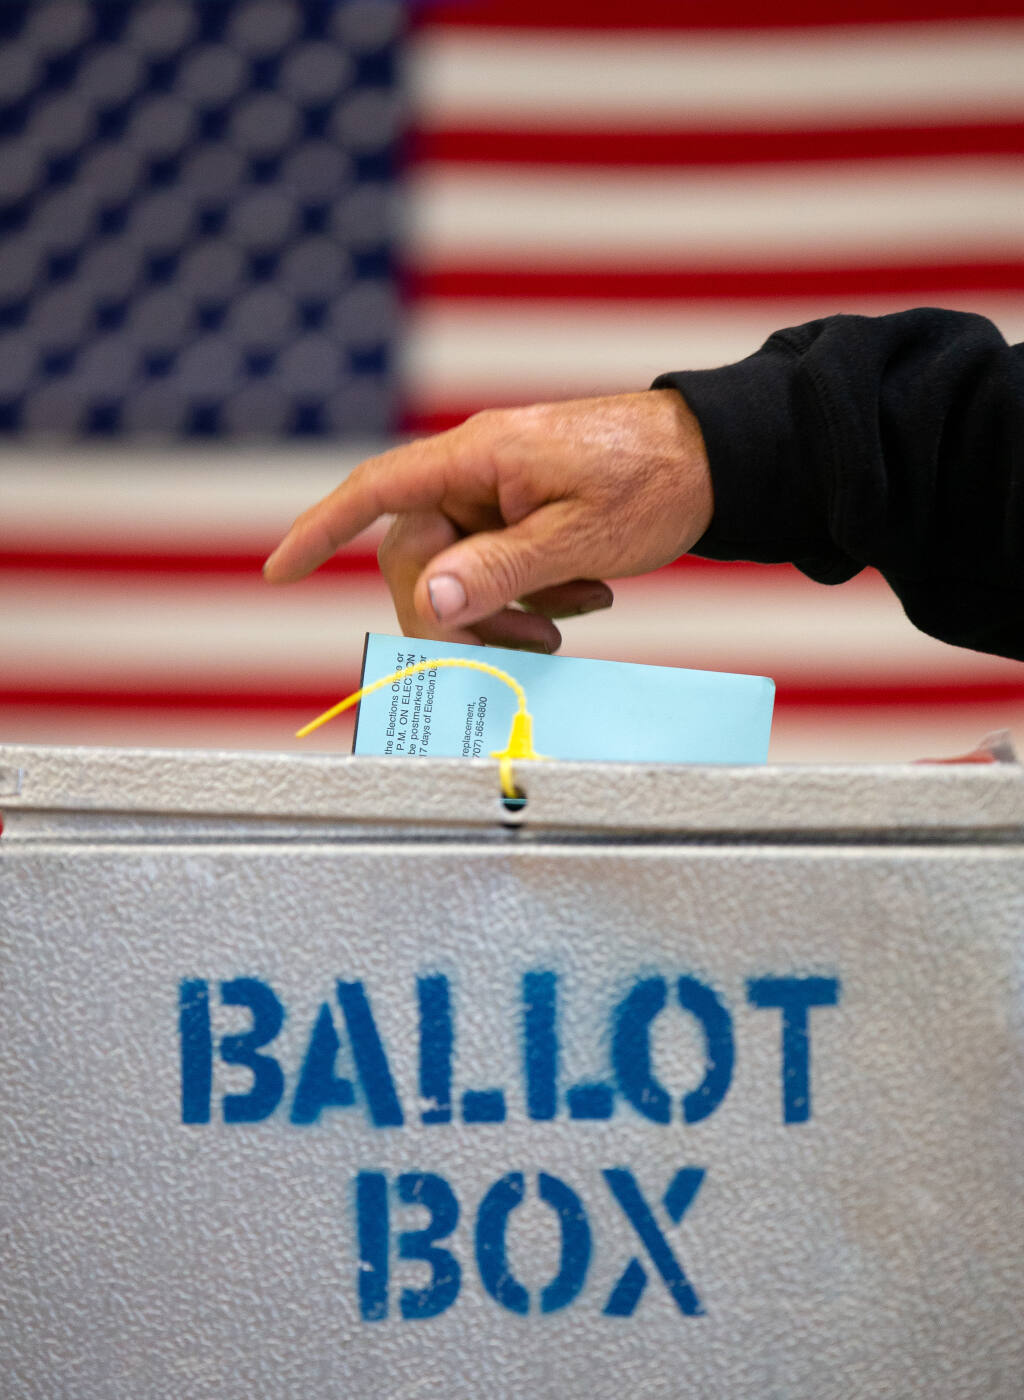 Bryan Asch of Santa Rosa personally places his mail-in ballot into a ballot box at the Sonoma County Fairgrounds on Election Day in Santa Rosa, California, on Tuesday, Nov. 3, 2020. (Alvin A.H. Jornada / The Press Democrat)